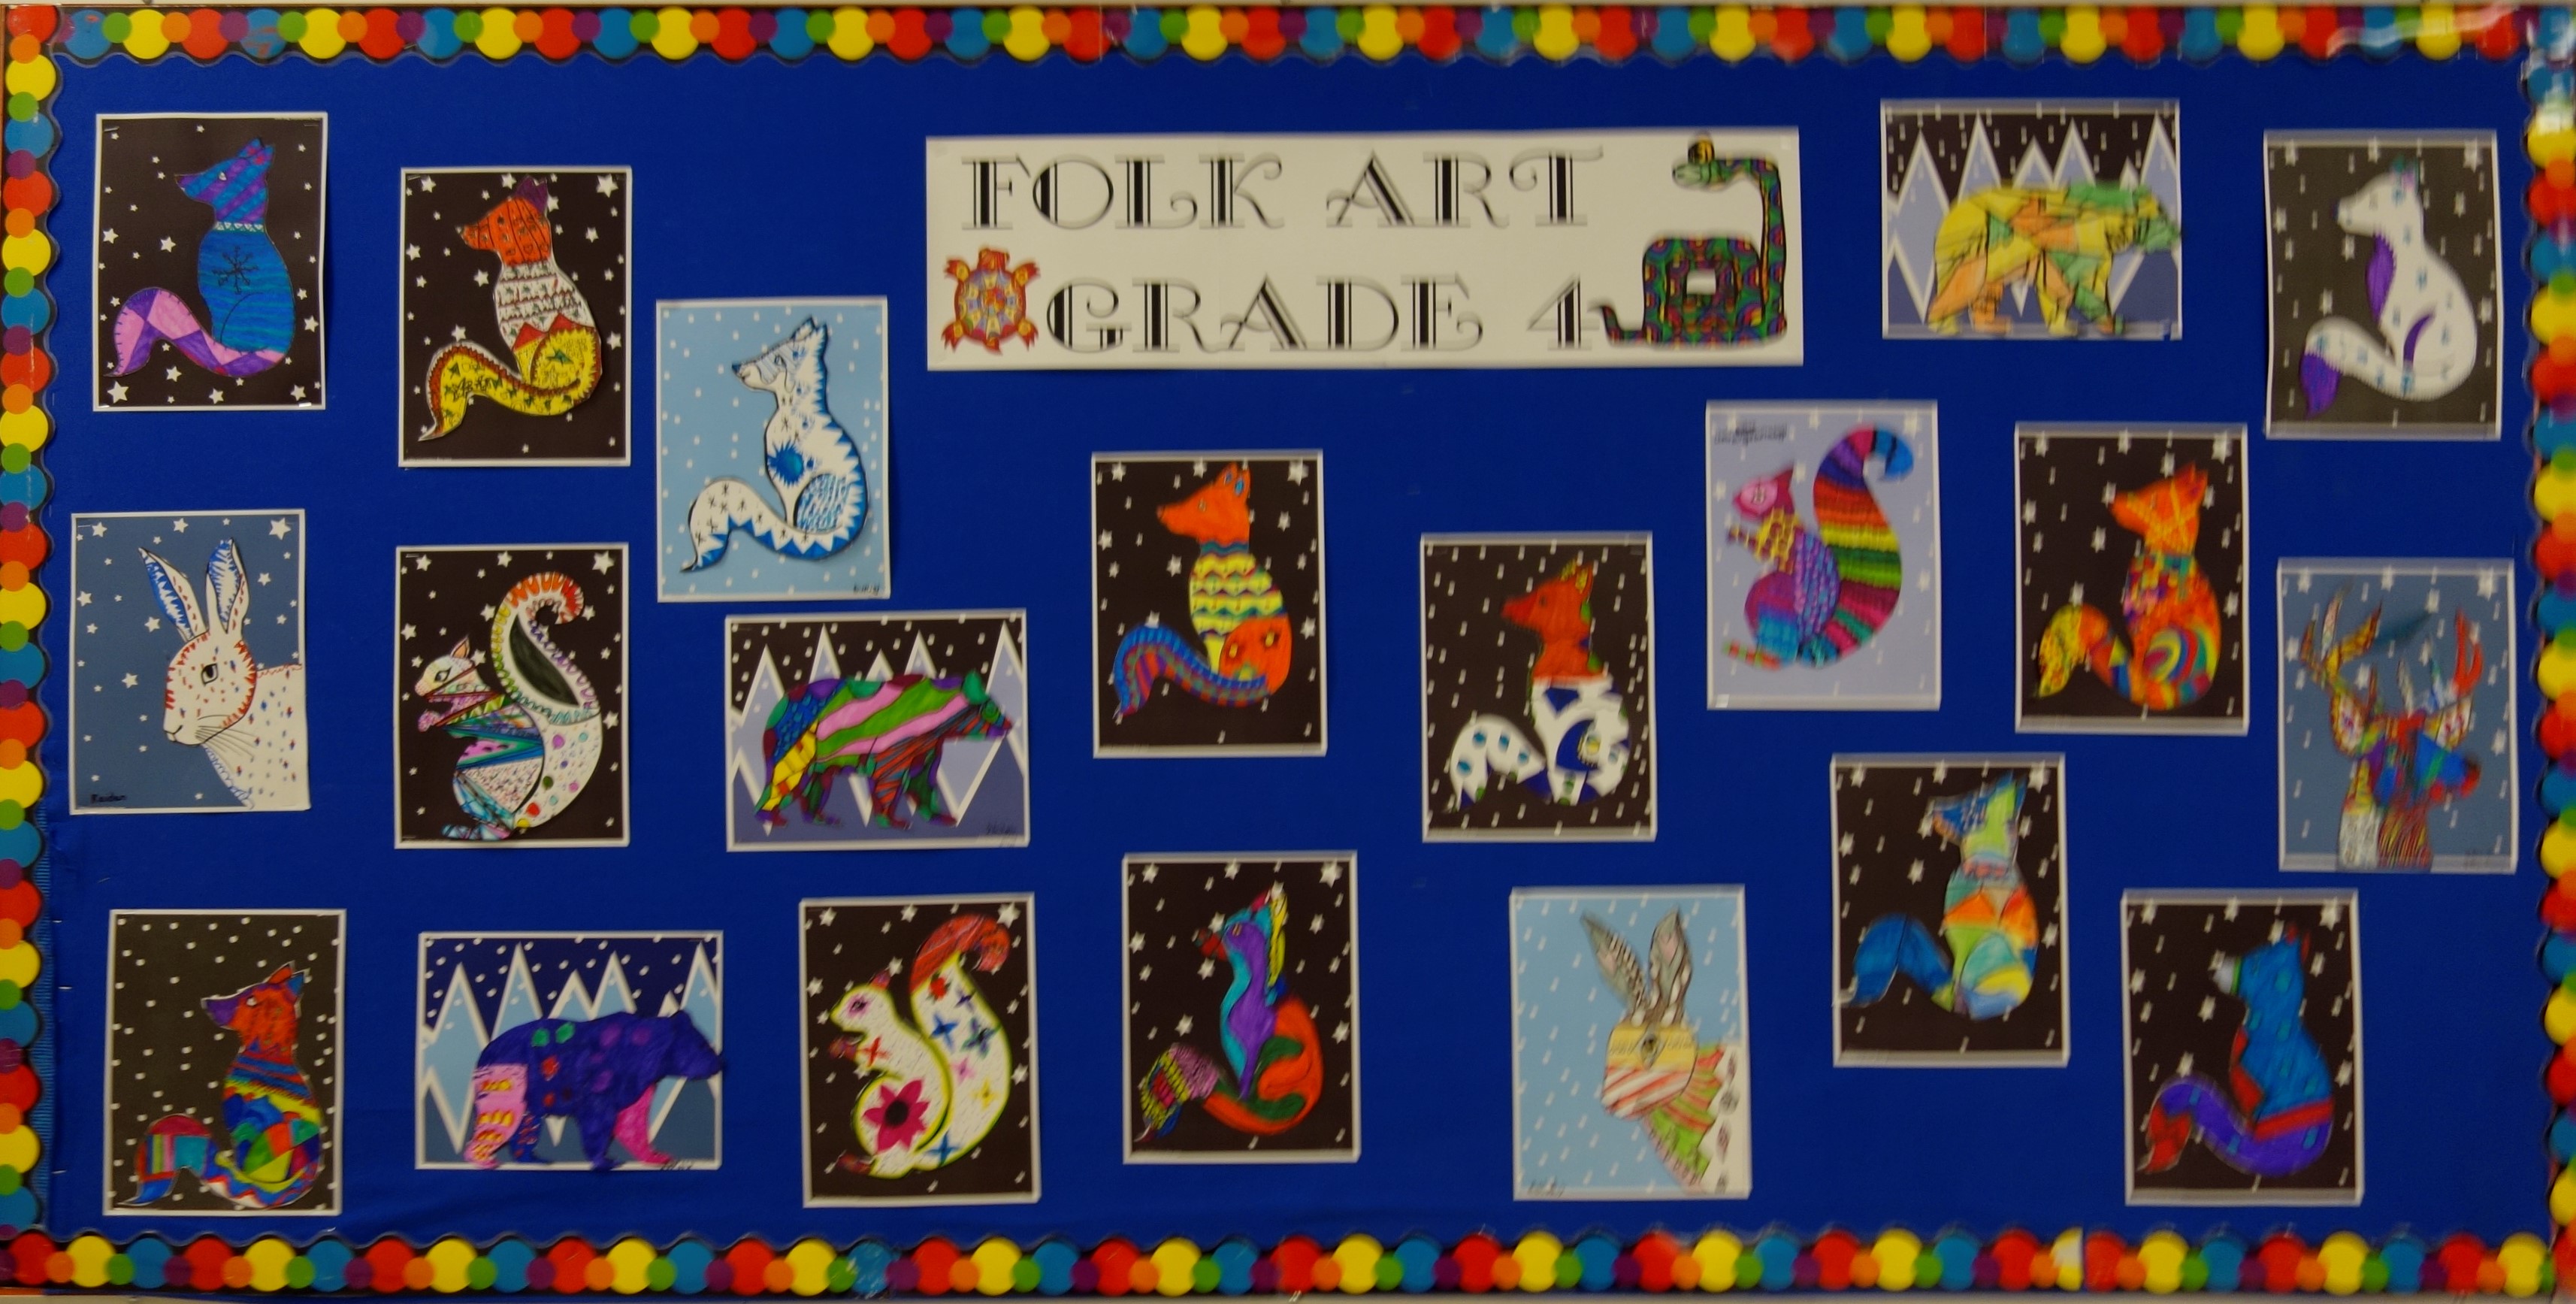 Student artwork is prominently displayed and updated regularly in the hallway